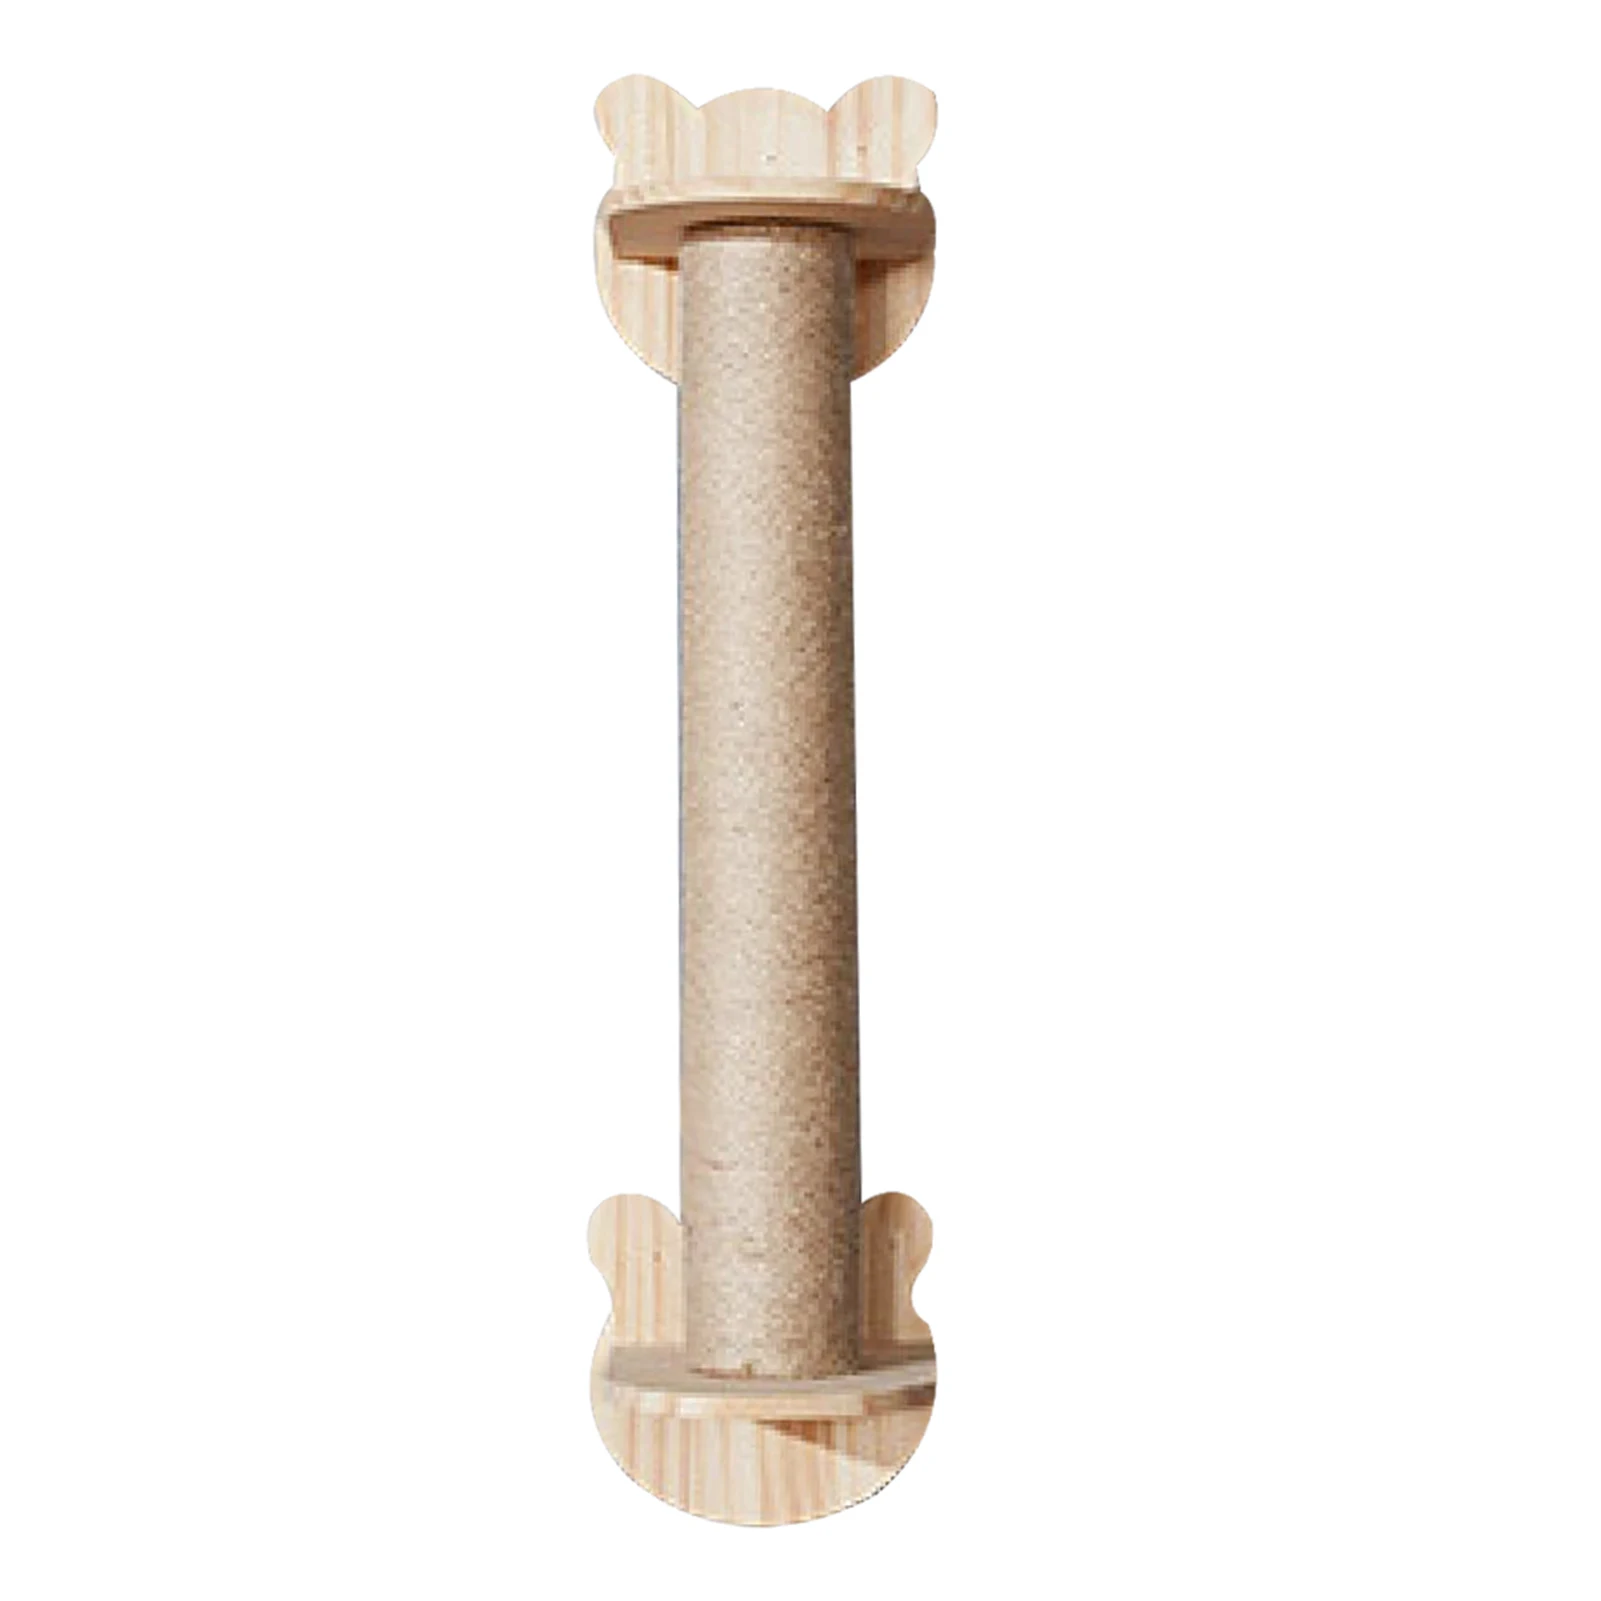 

Cat Scratching Post Wall Mounted Cat Toy With Mounting Screw Rope Hangings Pole Designed Cat Scratcher Posts For 's Health And